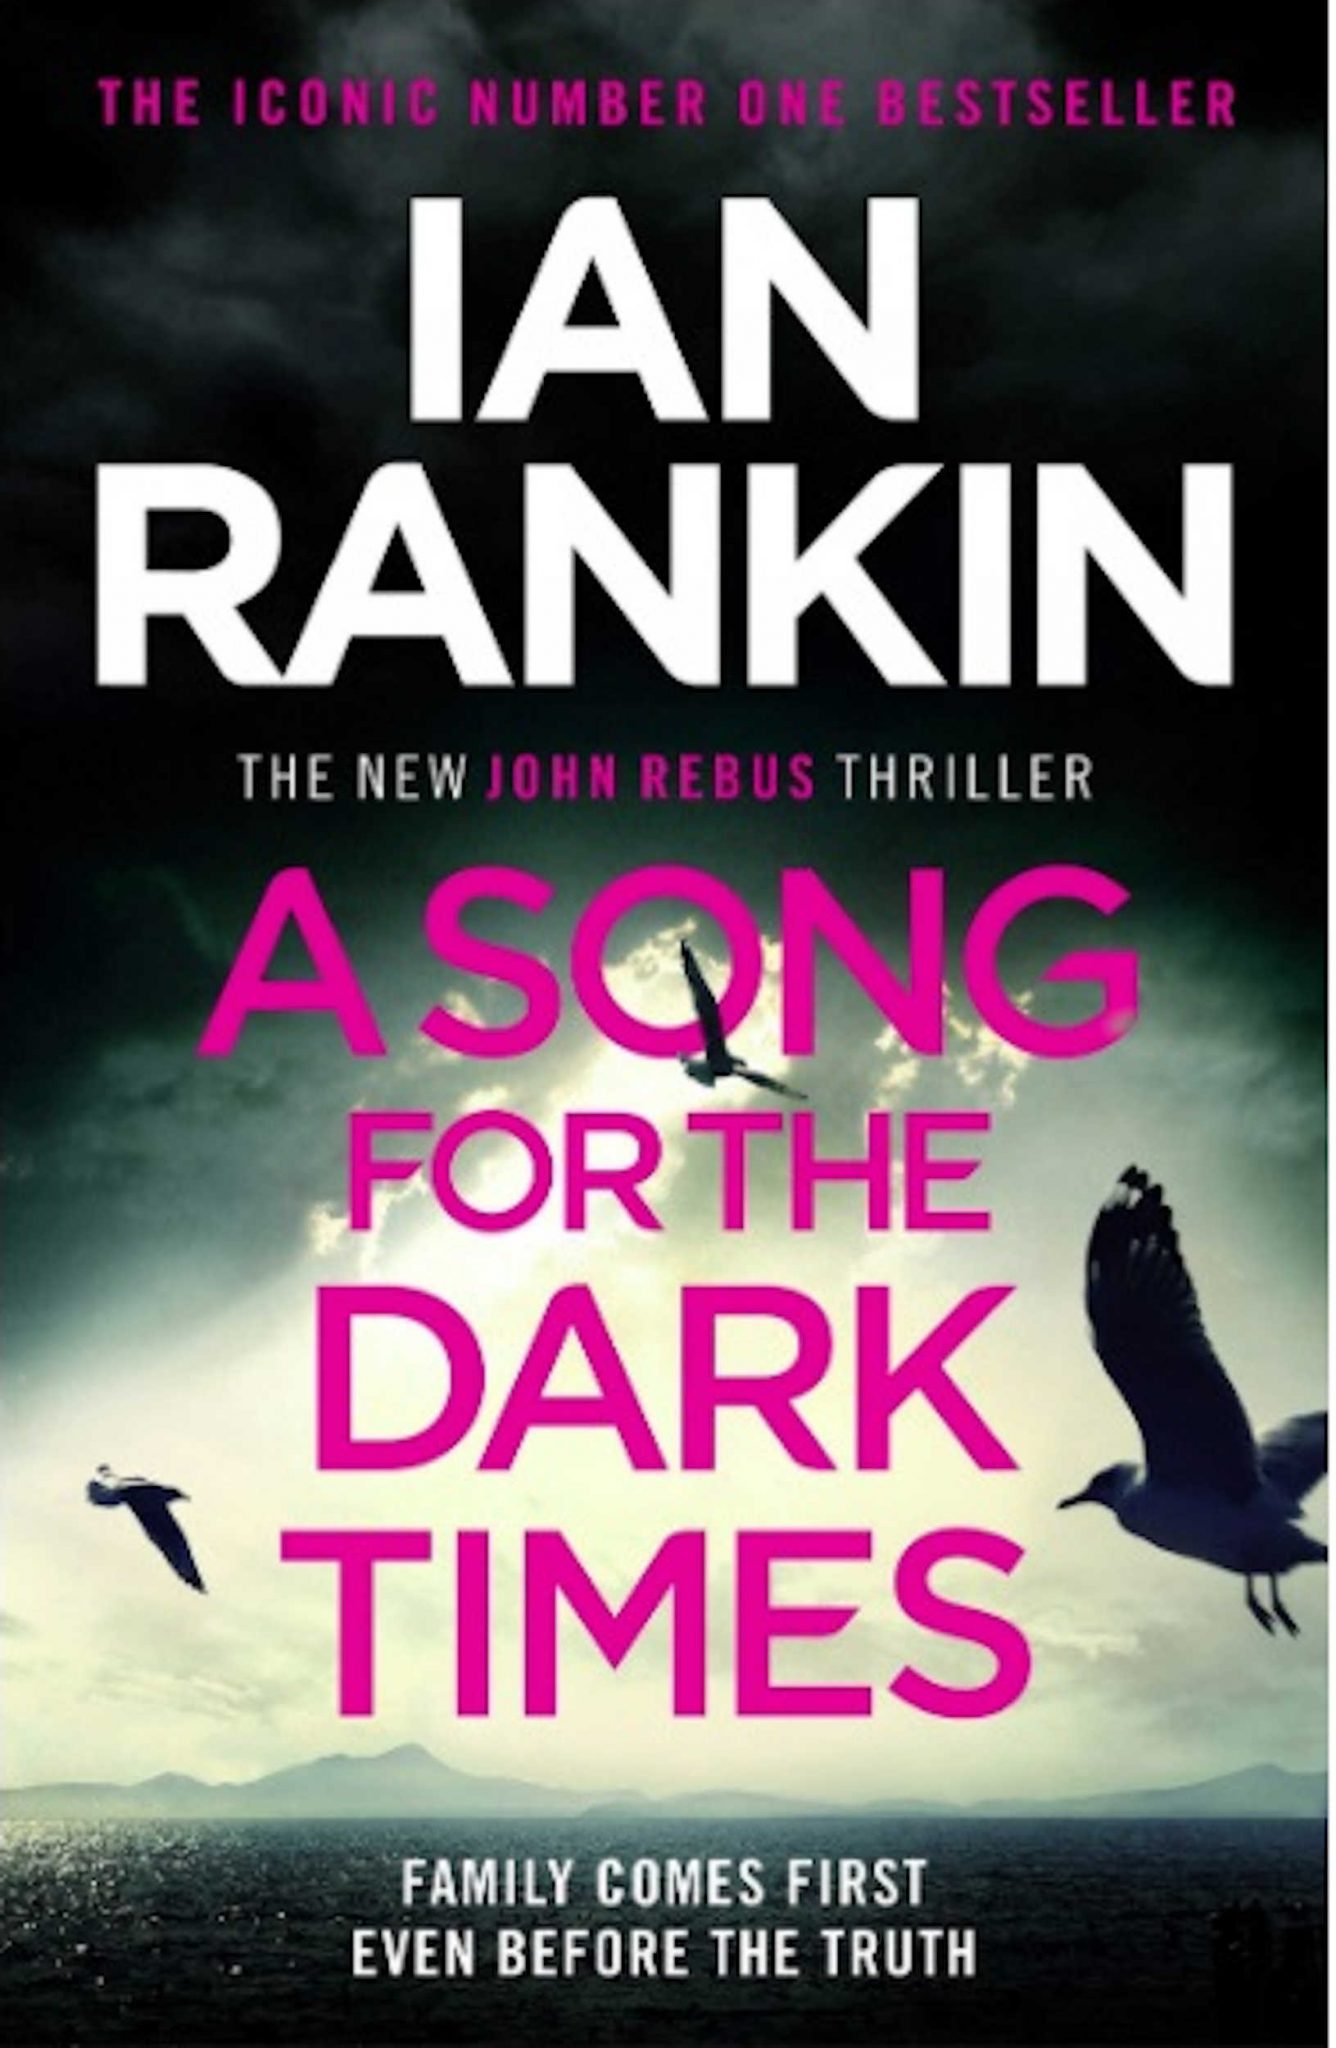 Ian Rankin only decides villain "20 or 30 pages near the end" of books